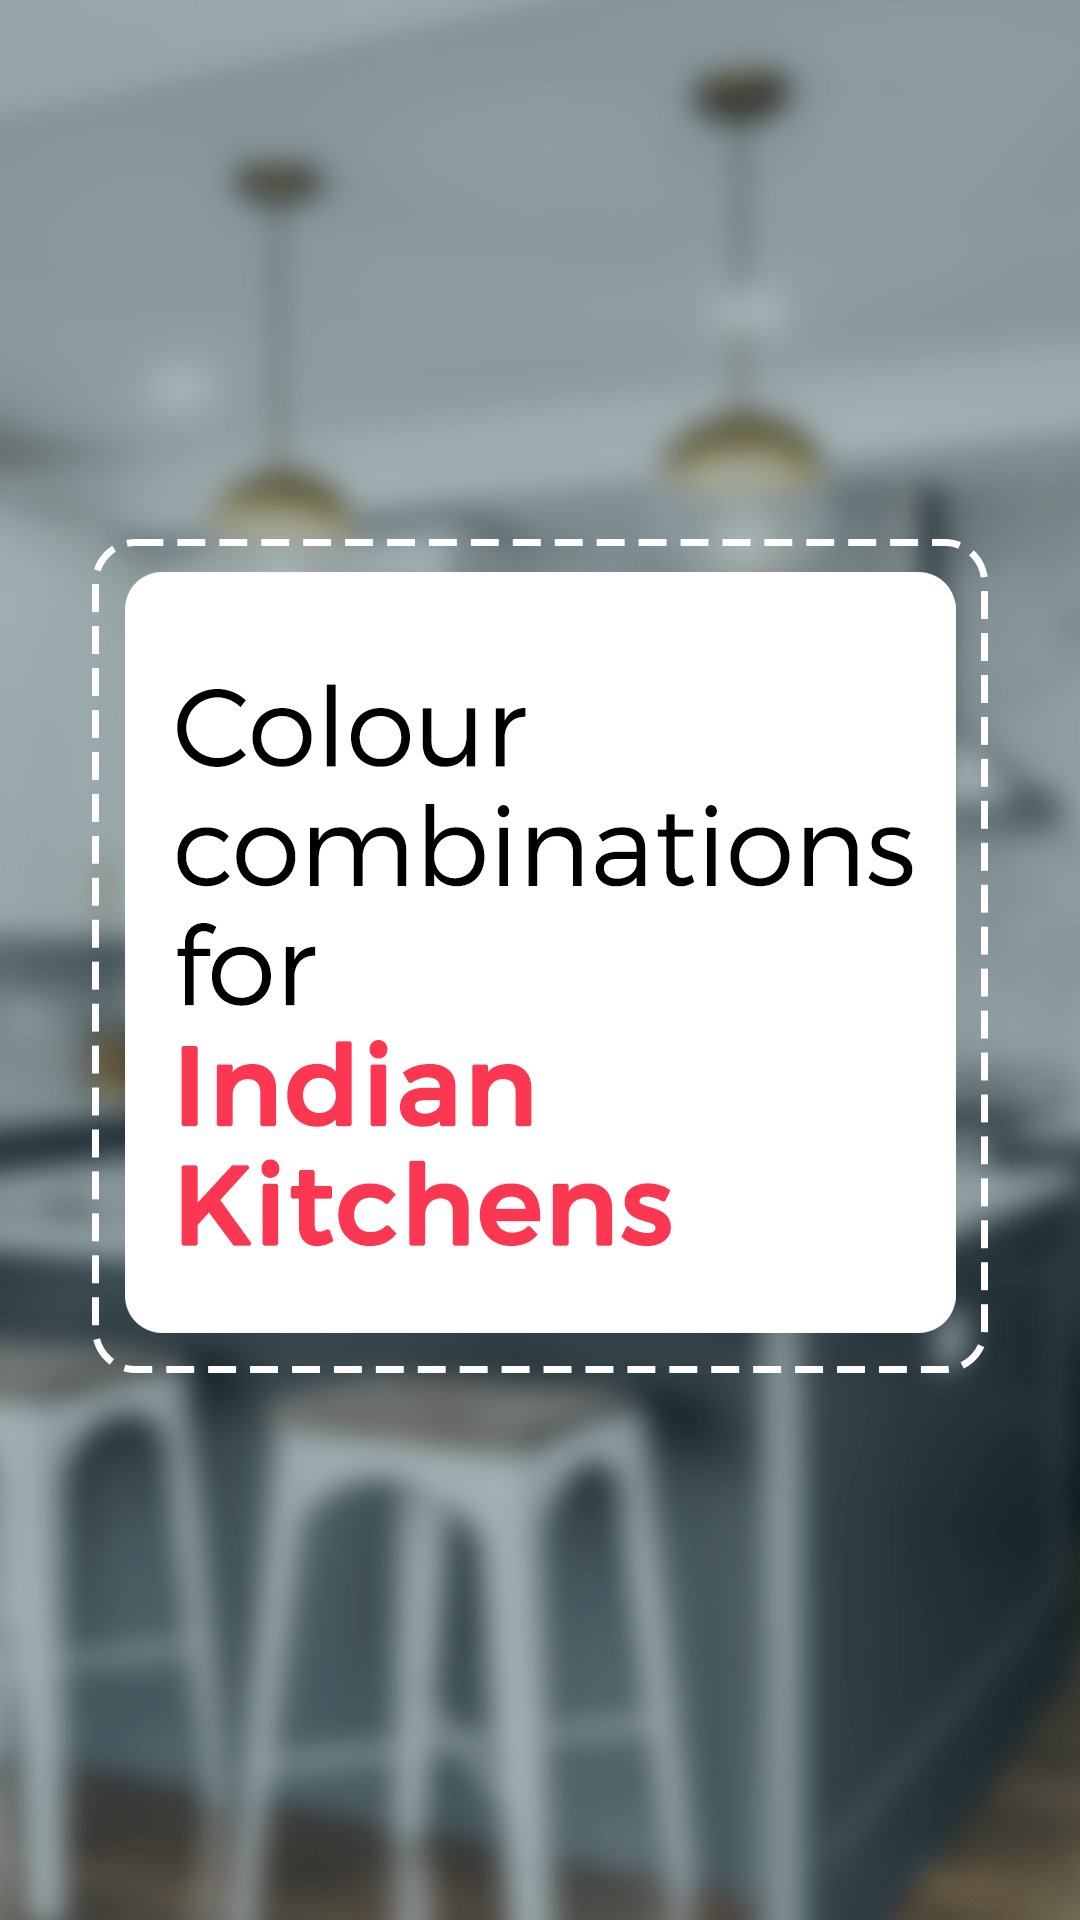 Best color combinations for kitchens